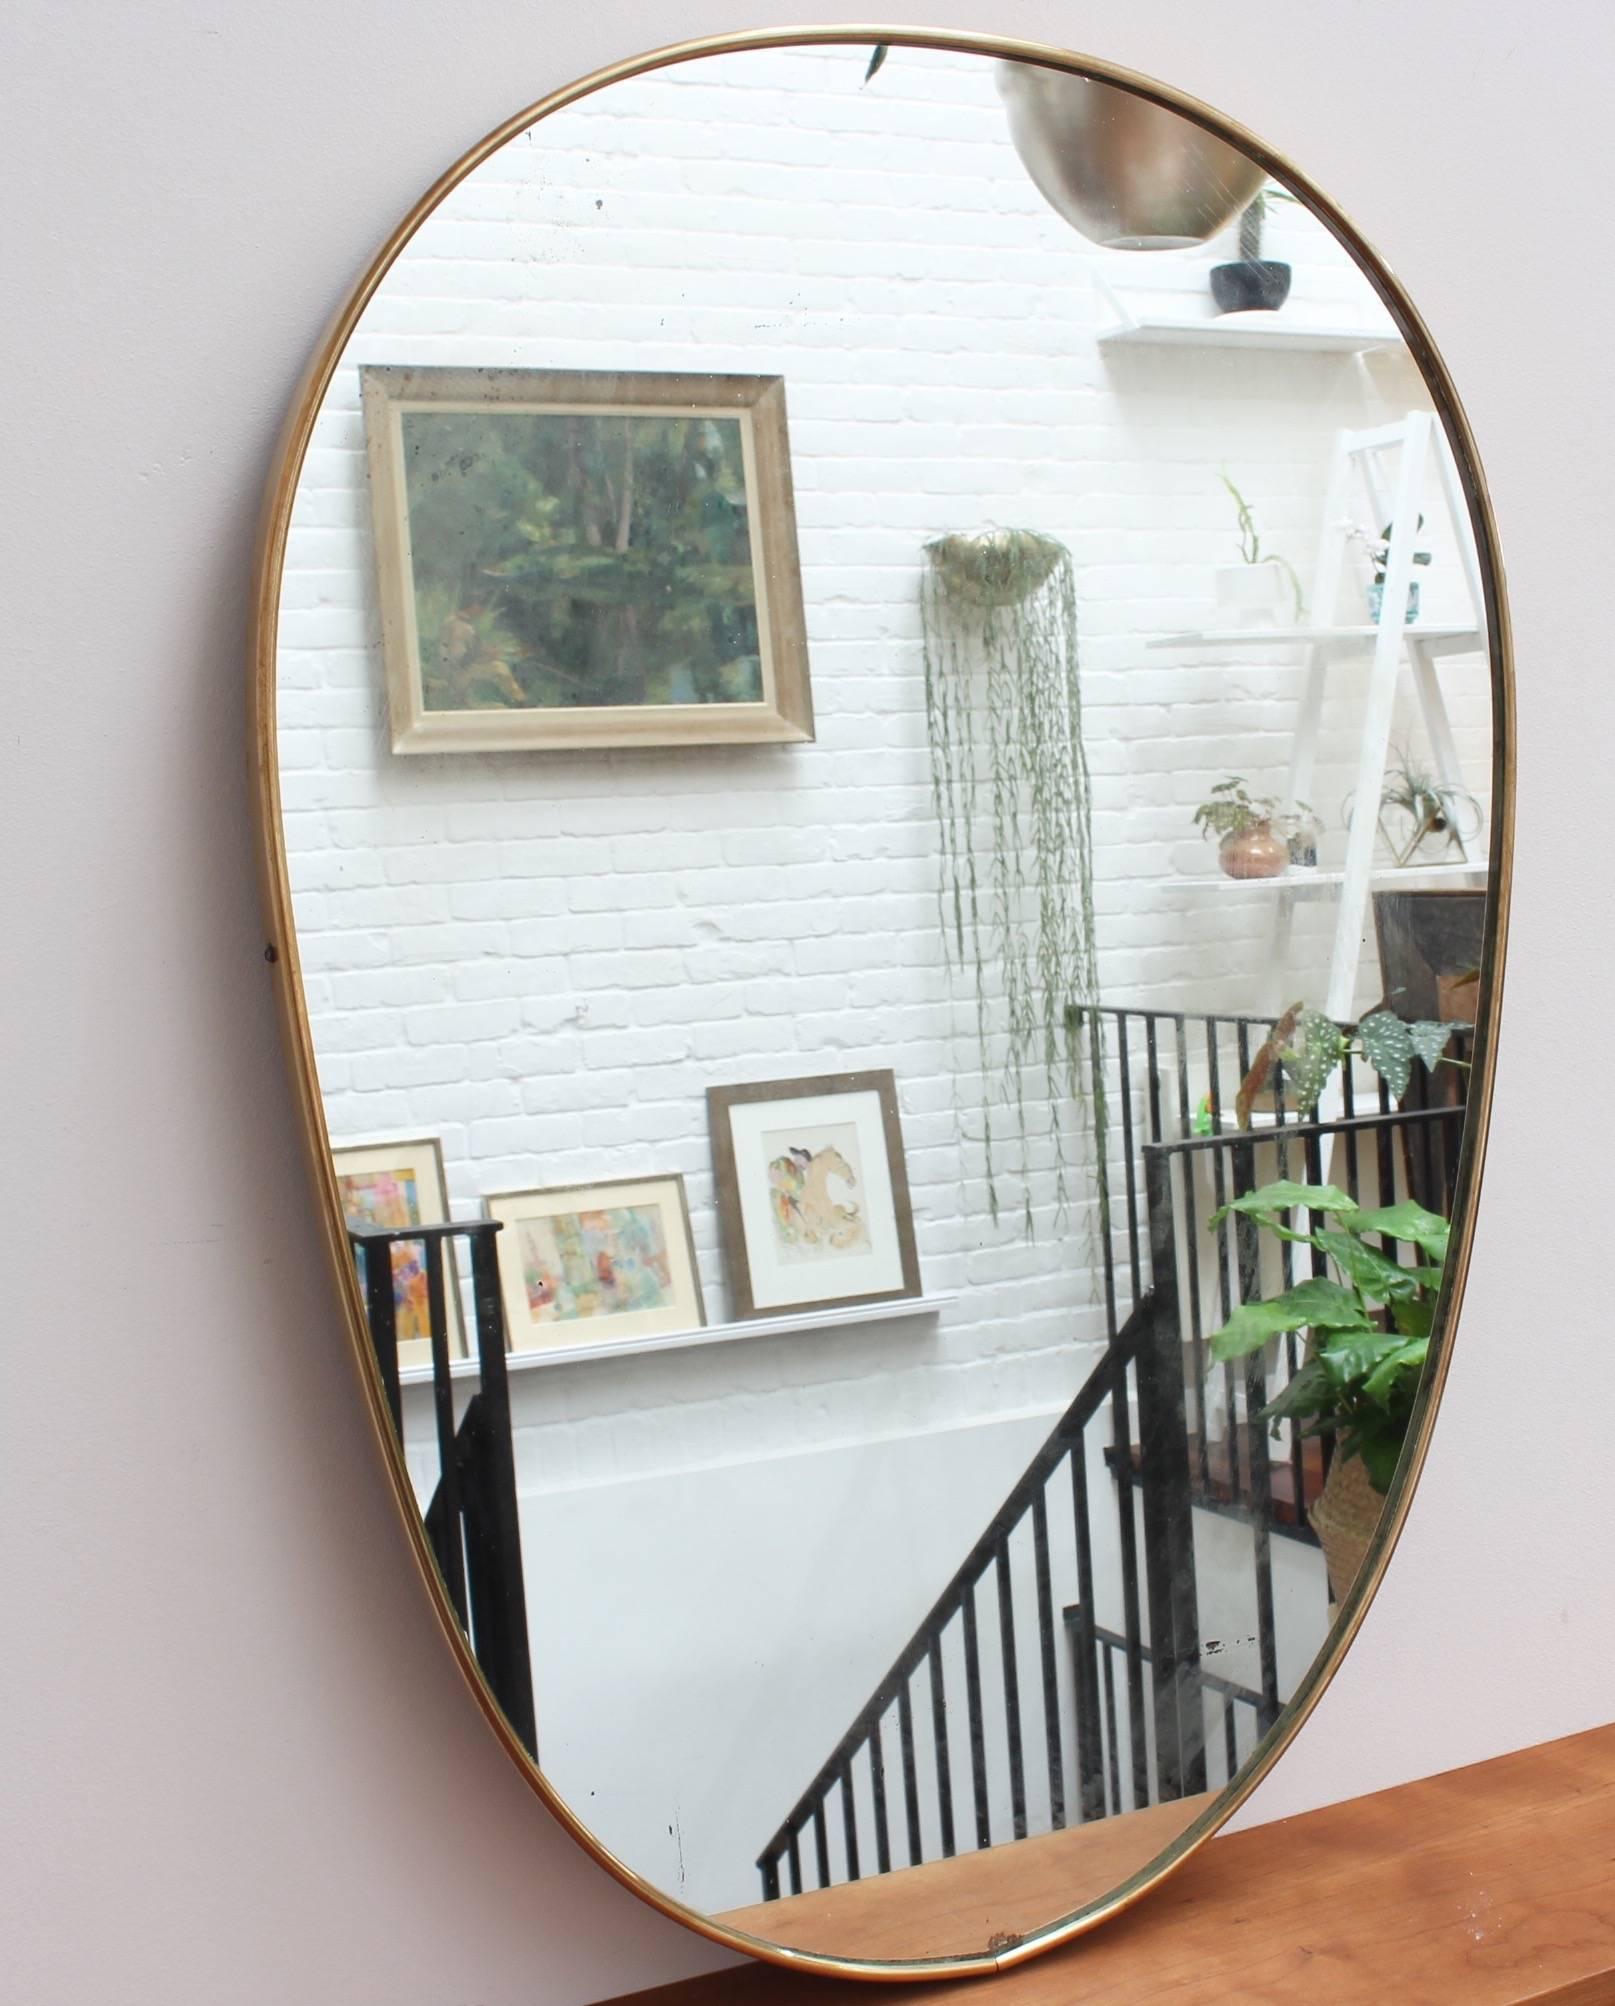 Midcentury Italian wall mirror with brass frame, circa 1950s. The mirror is unusually shaped - like an inverted egg - but always elegant and distinctive in a modern Gio Ponti style. This mirror is in good vintage condition. There are some evident